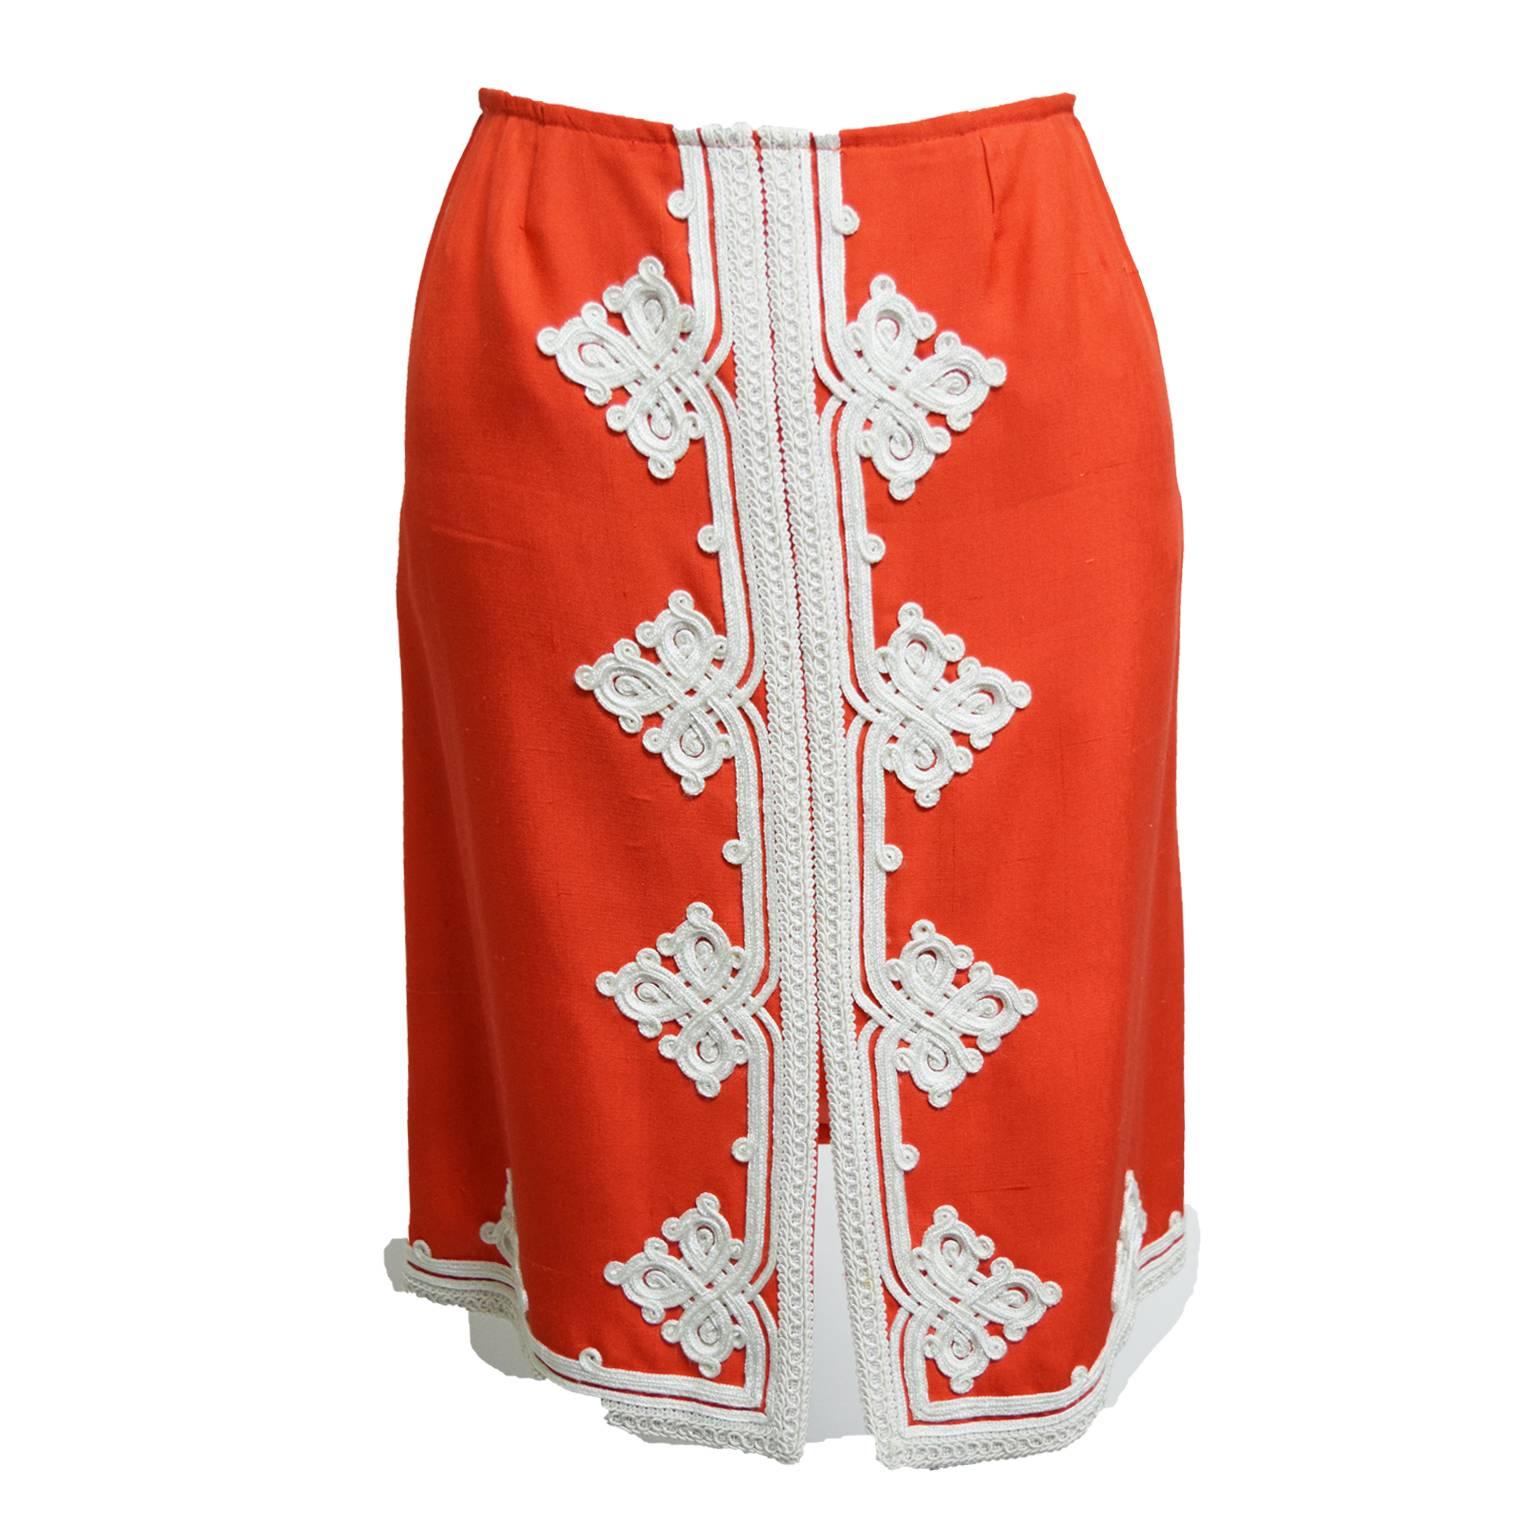 This beautiful skirt by Oscar de la Renta is definitely a statement piece that would go well with many blouses in your closet. Made of a soft linen blend, this sheath skirt has a little flare towards the bottom and white embroidery to create a